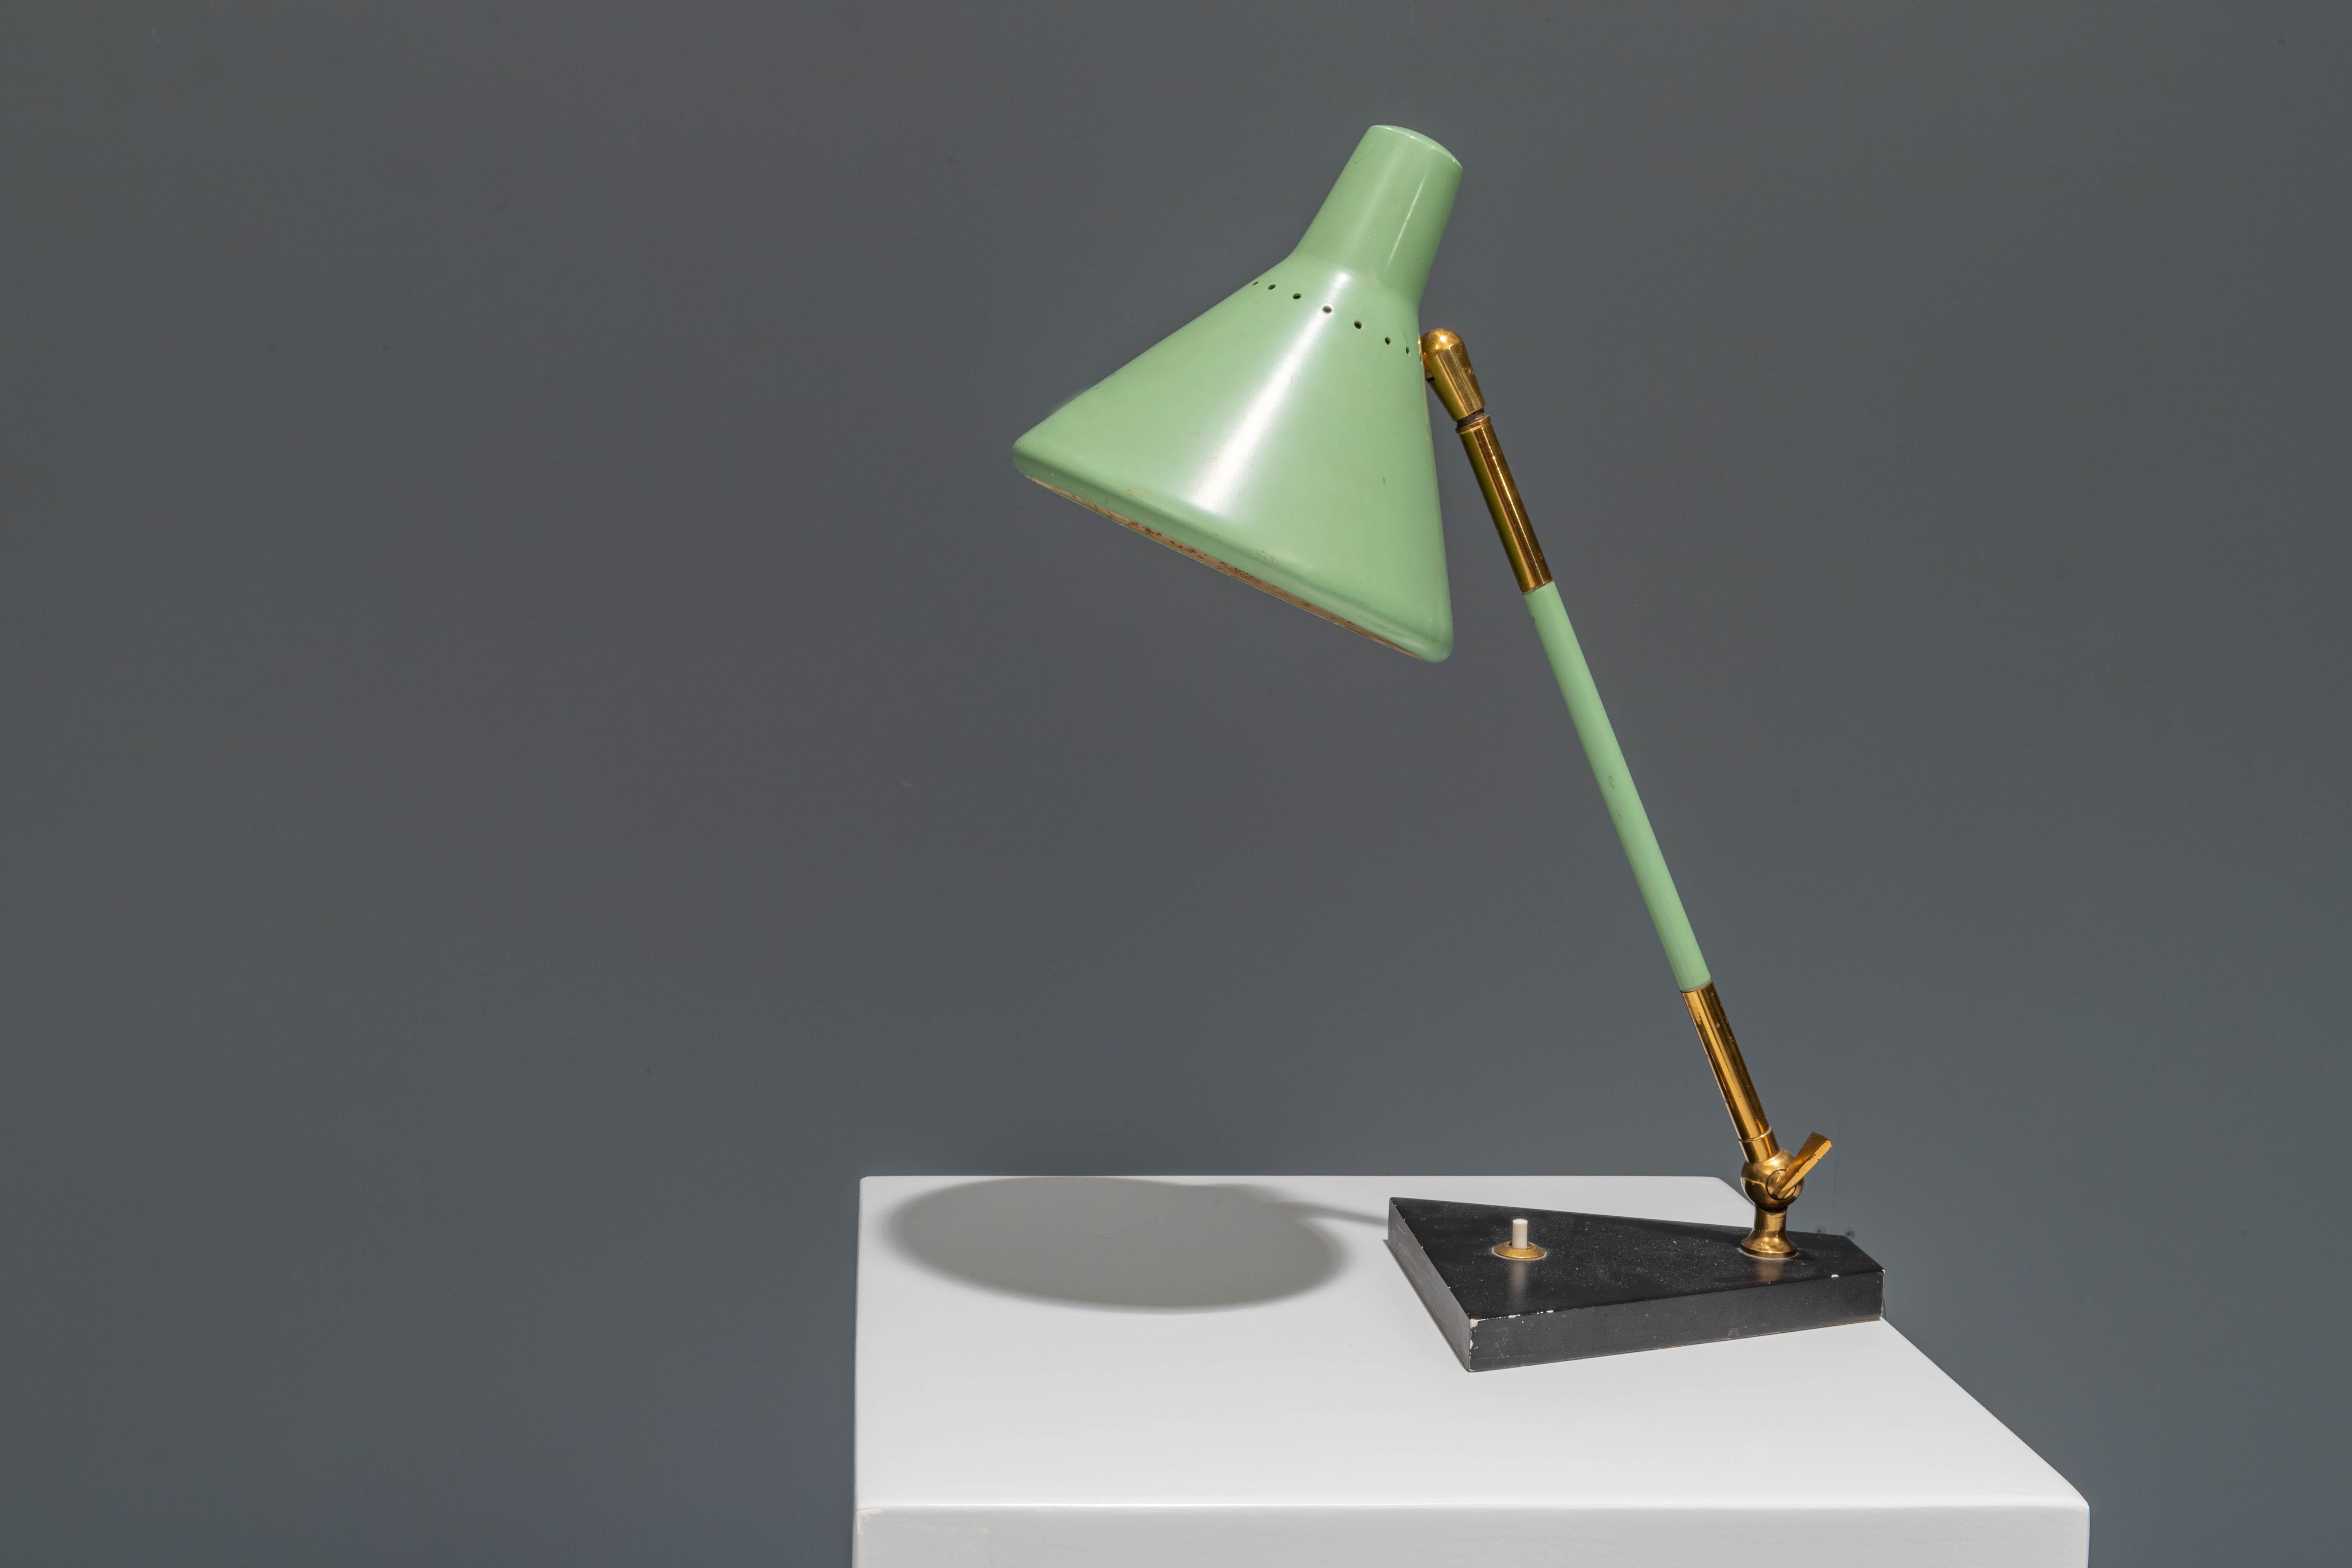 A well balanced choice of materials and great attention to detail. Striking are the famous Stilux holes in the lampshade and the beautiful shiny gold-colored adjustment knobs. All is in good condition. The desk lamp is adjustable at the painted